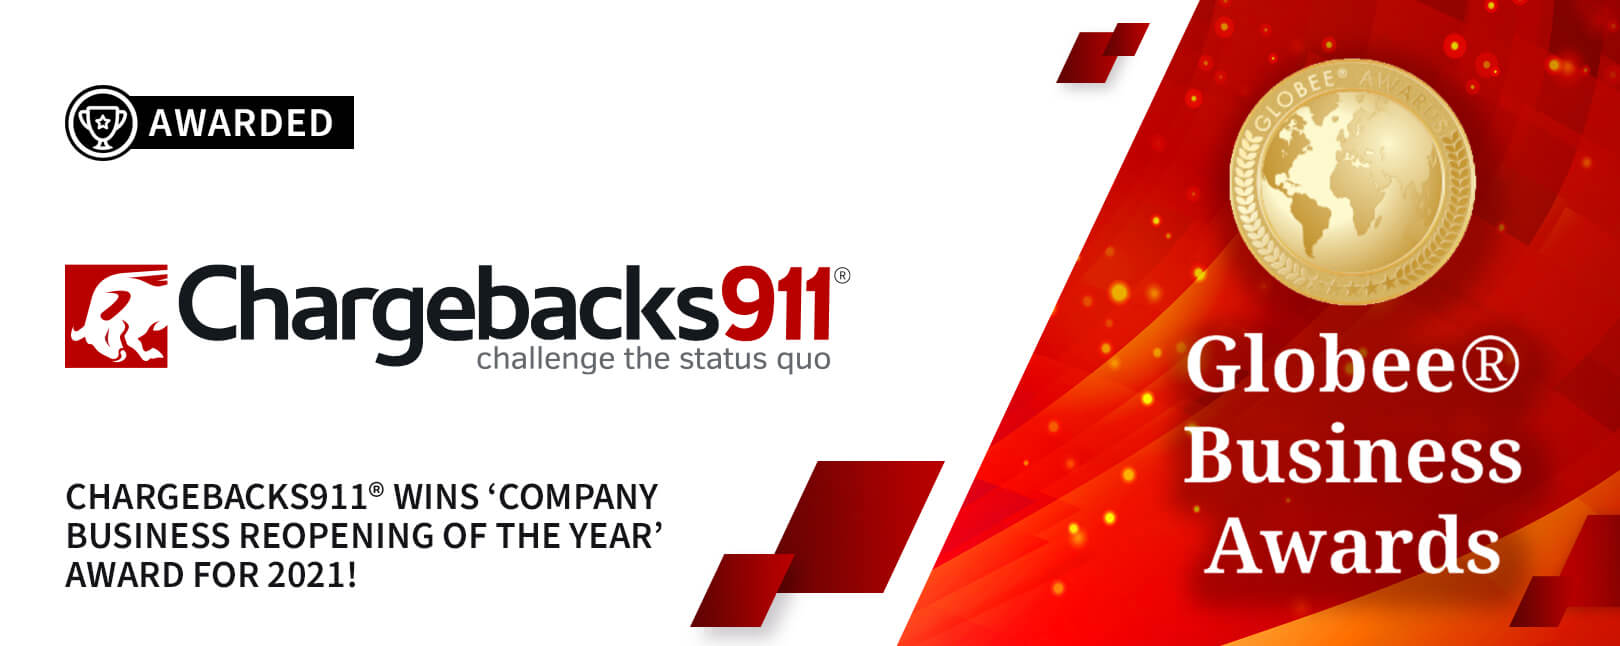 Chargebacks911® Wins ‘Company Business Reopening of the Year’ Award for 2021!